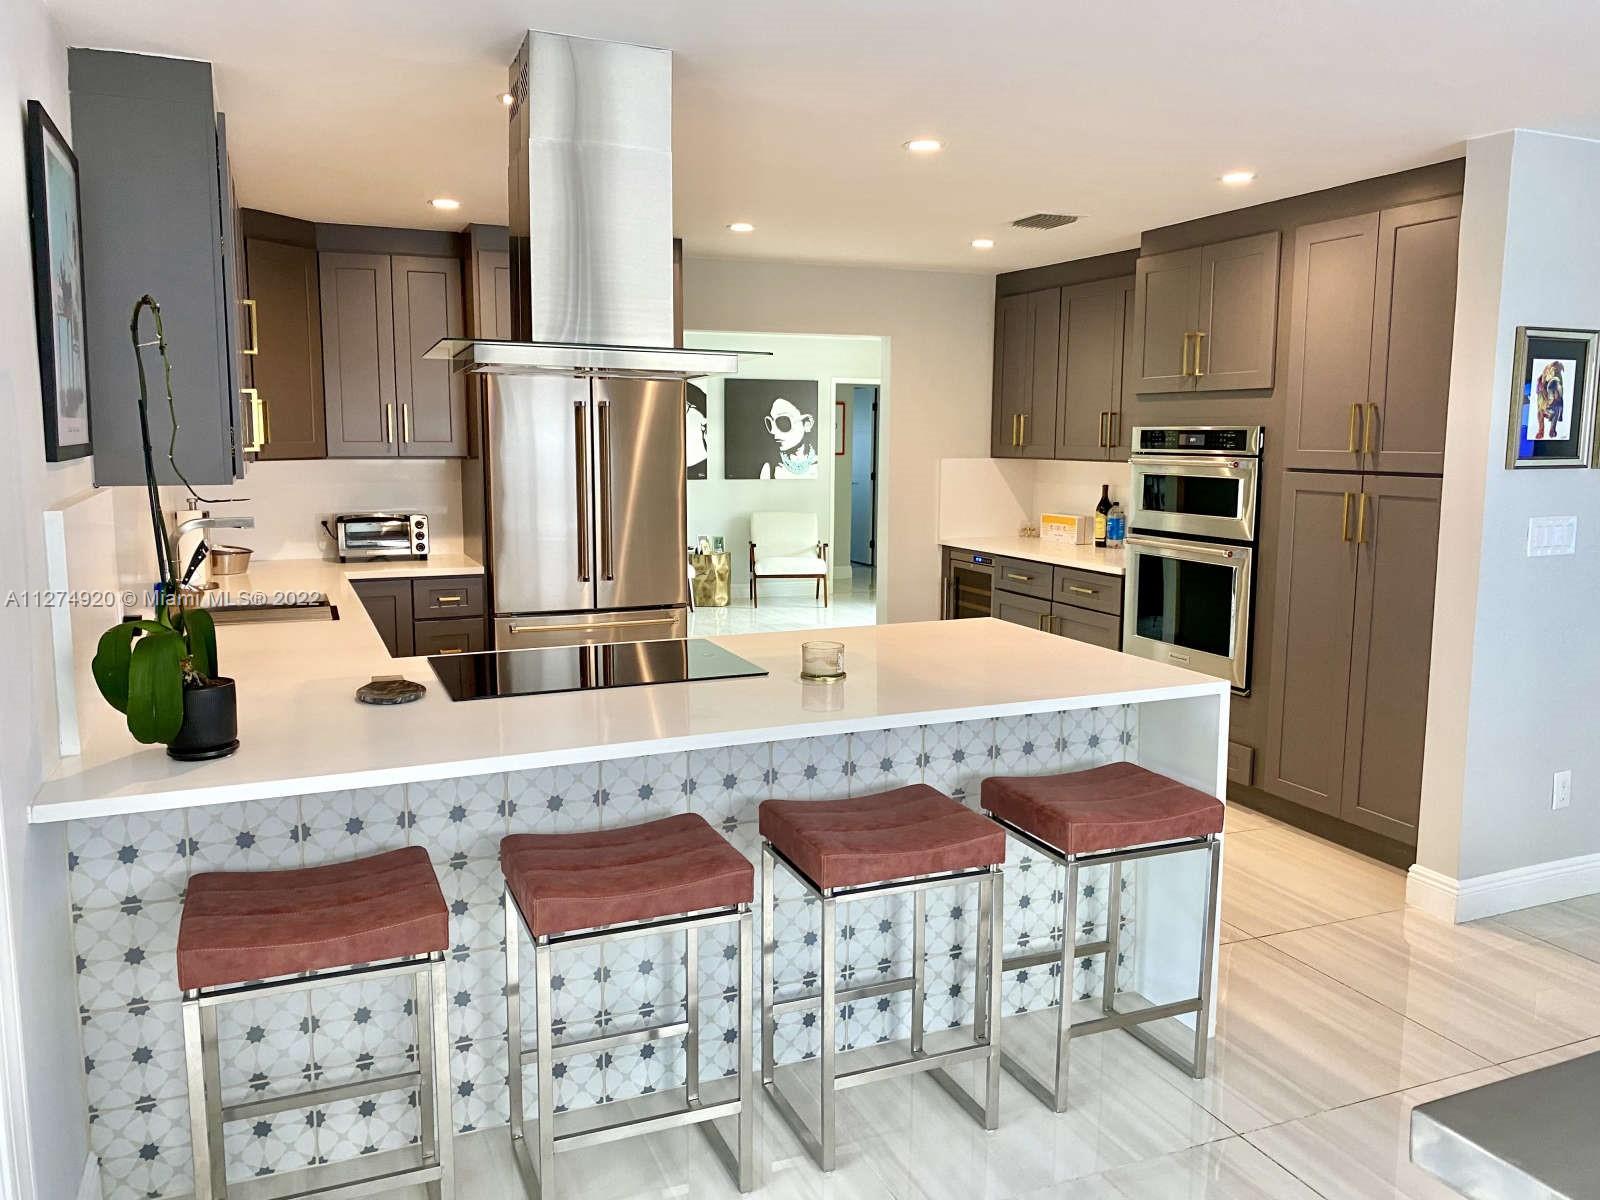 a kitchen with stainless steel appliances granite countertop a sink and refrigerator